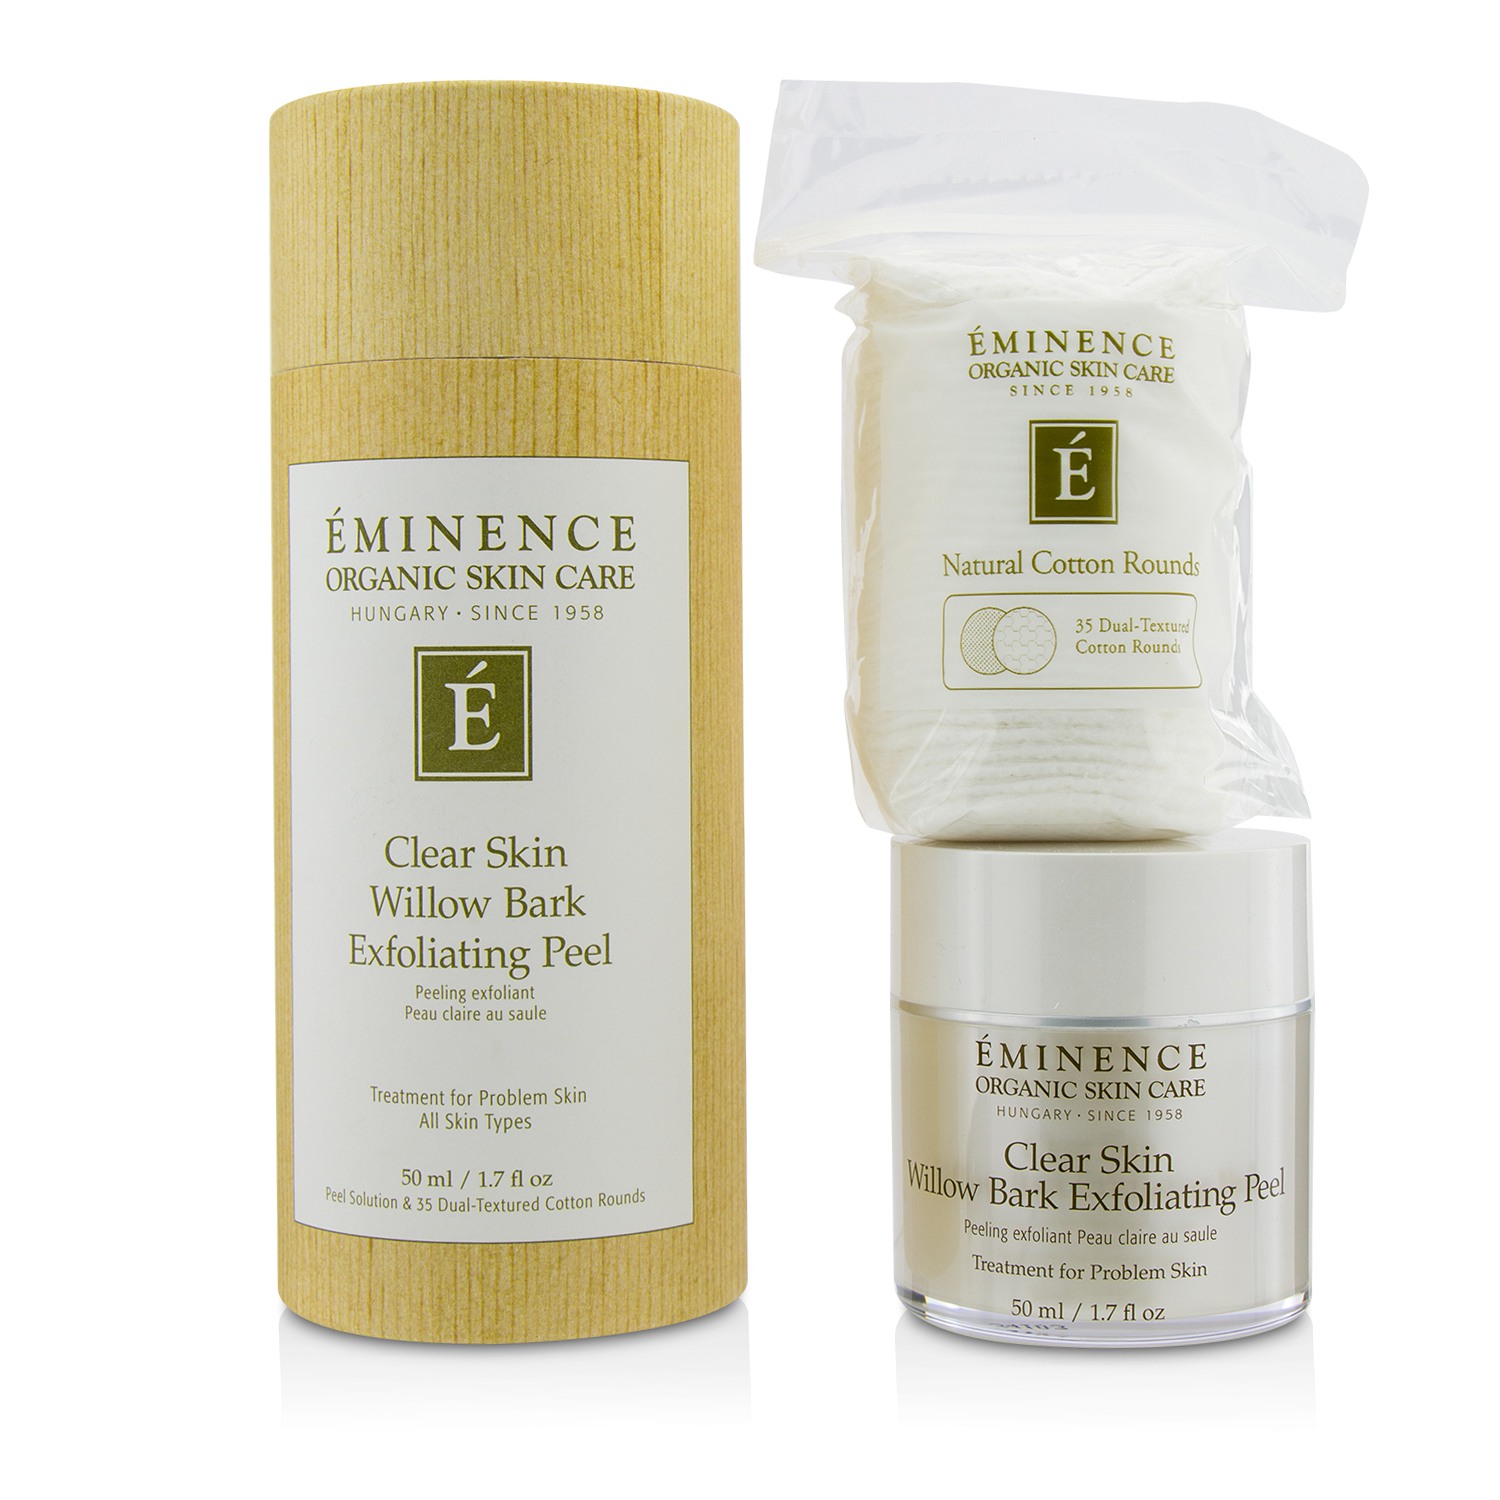 Clear Skin Willow Bark Exfoliating Peel (with 35 Dual-Textured Cotton Rounds) Eminence Image